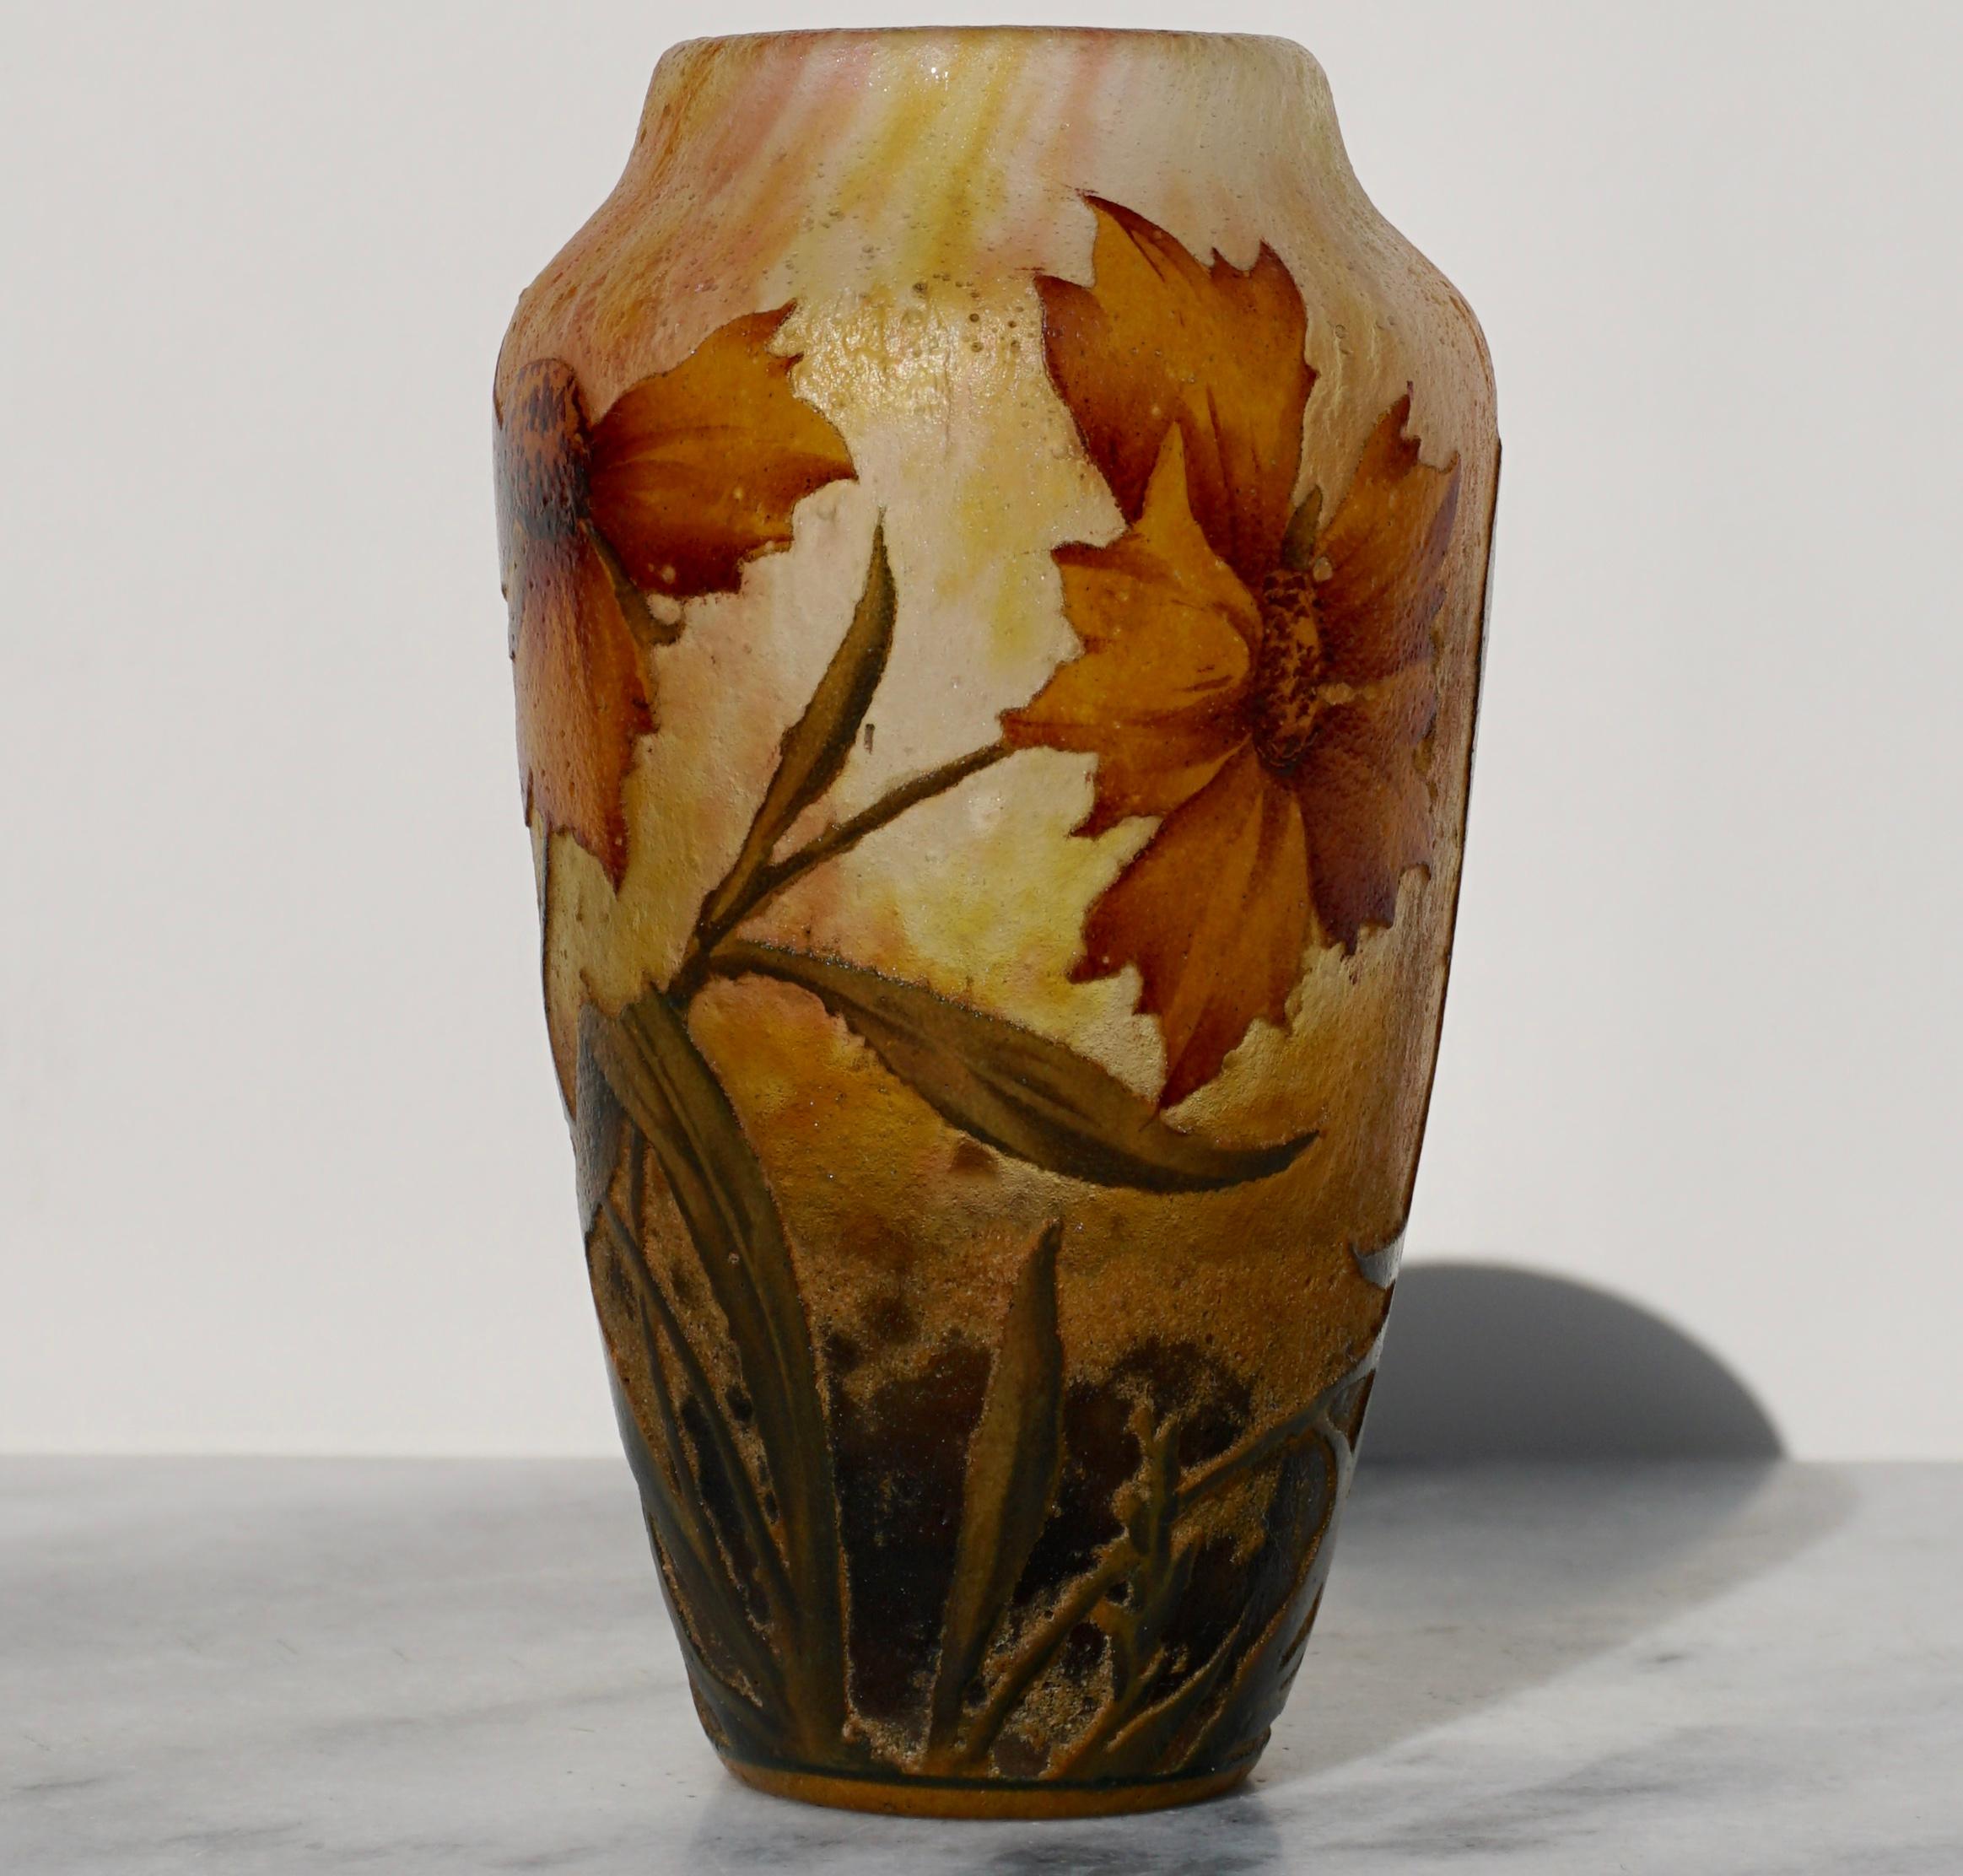 Daum Nancy French enameled cameo glass vase, circa 1910. Depicting six beautiful orange and red flowers from budding to full bloom stages with leaves and grasses. Thick wheel carved and acid etched with enameling in greens, blues, oranges and reds.